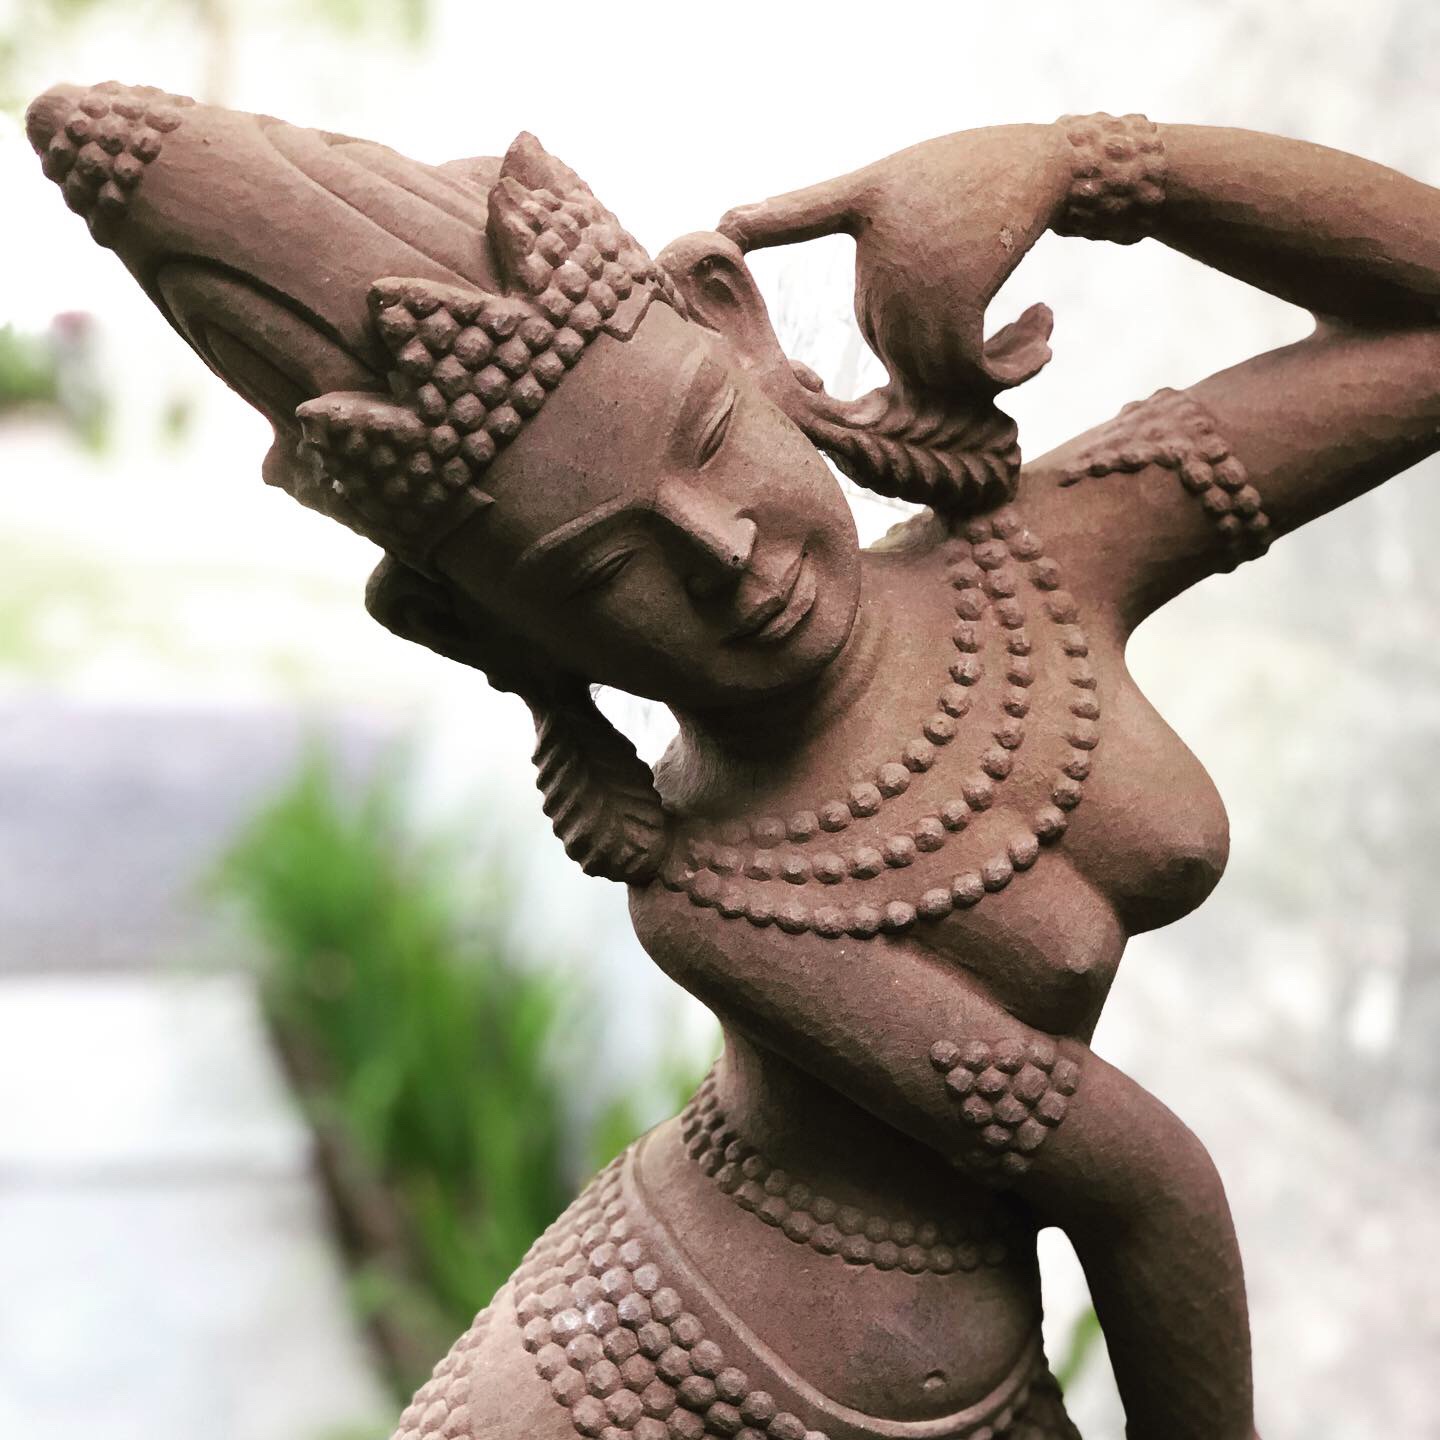 “Cambodian Khmer Apsara Dancer with her left arm raised in a dynamic dancing pose, wearing a headdress and a garland”, Amansara Angkor